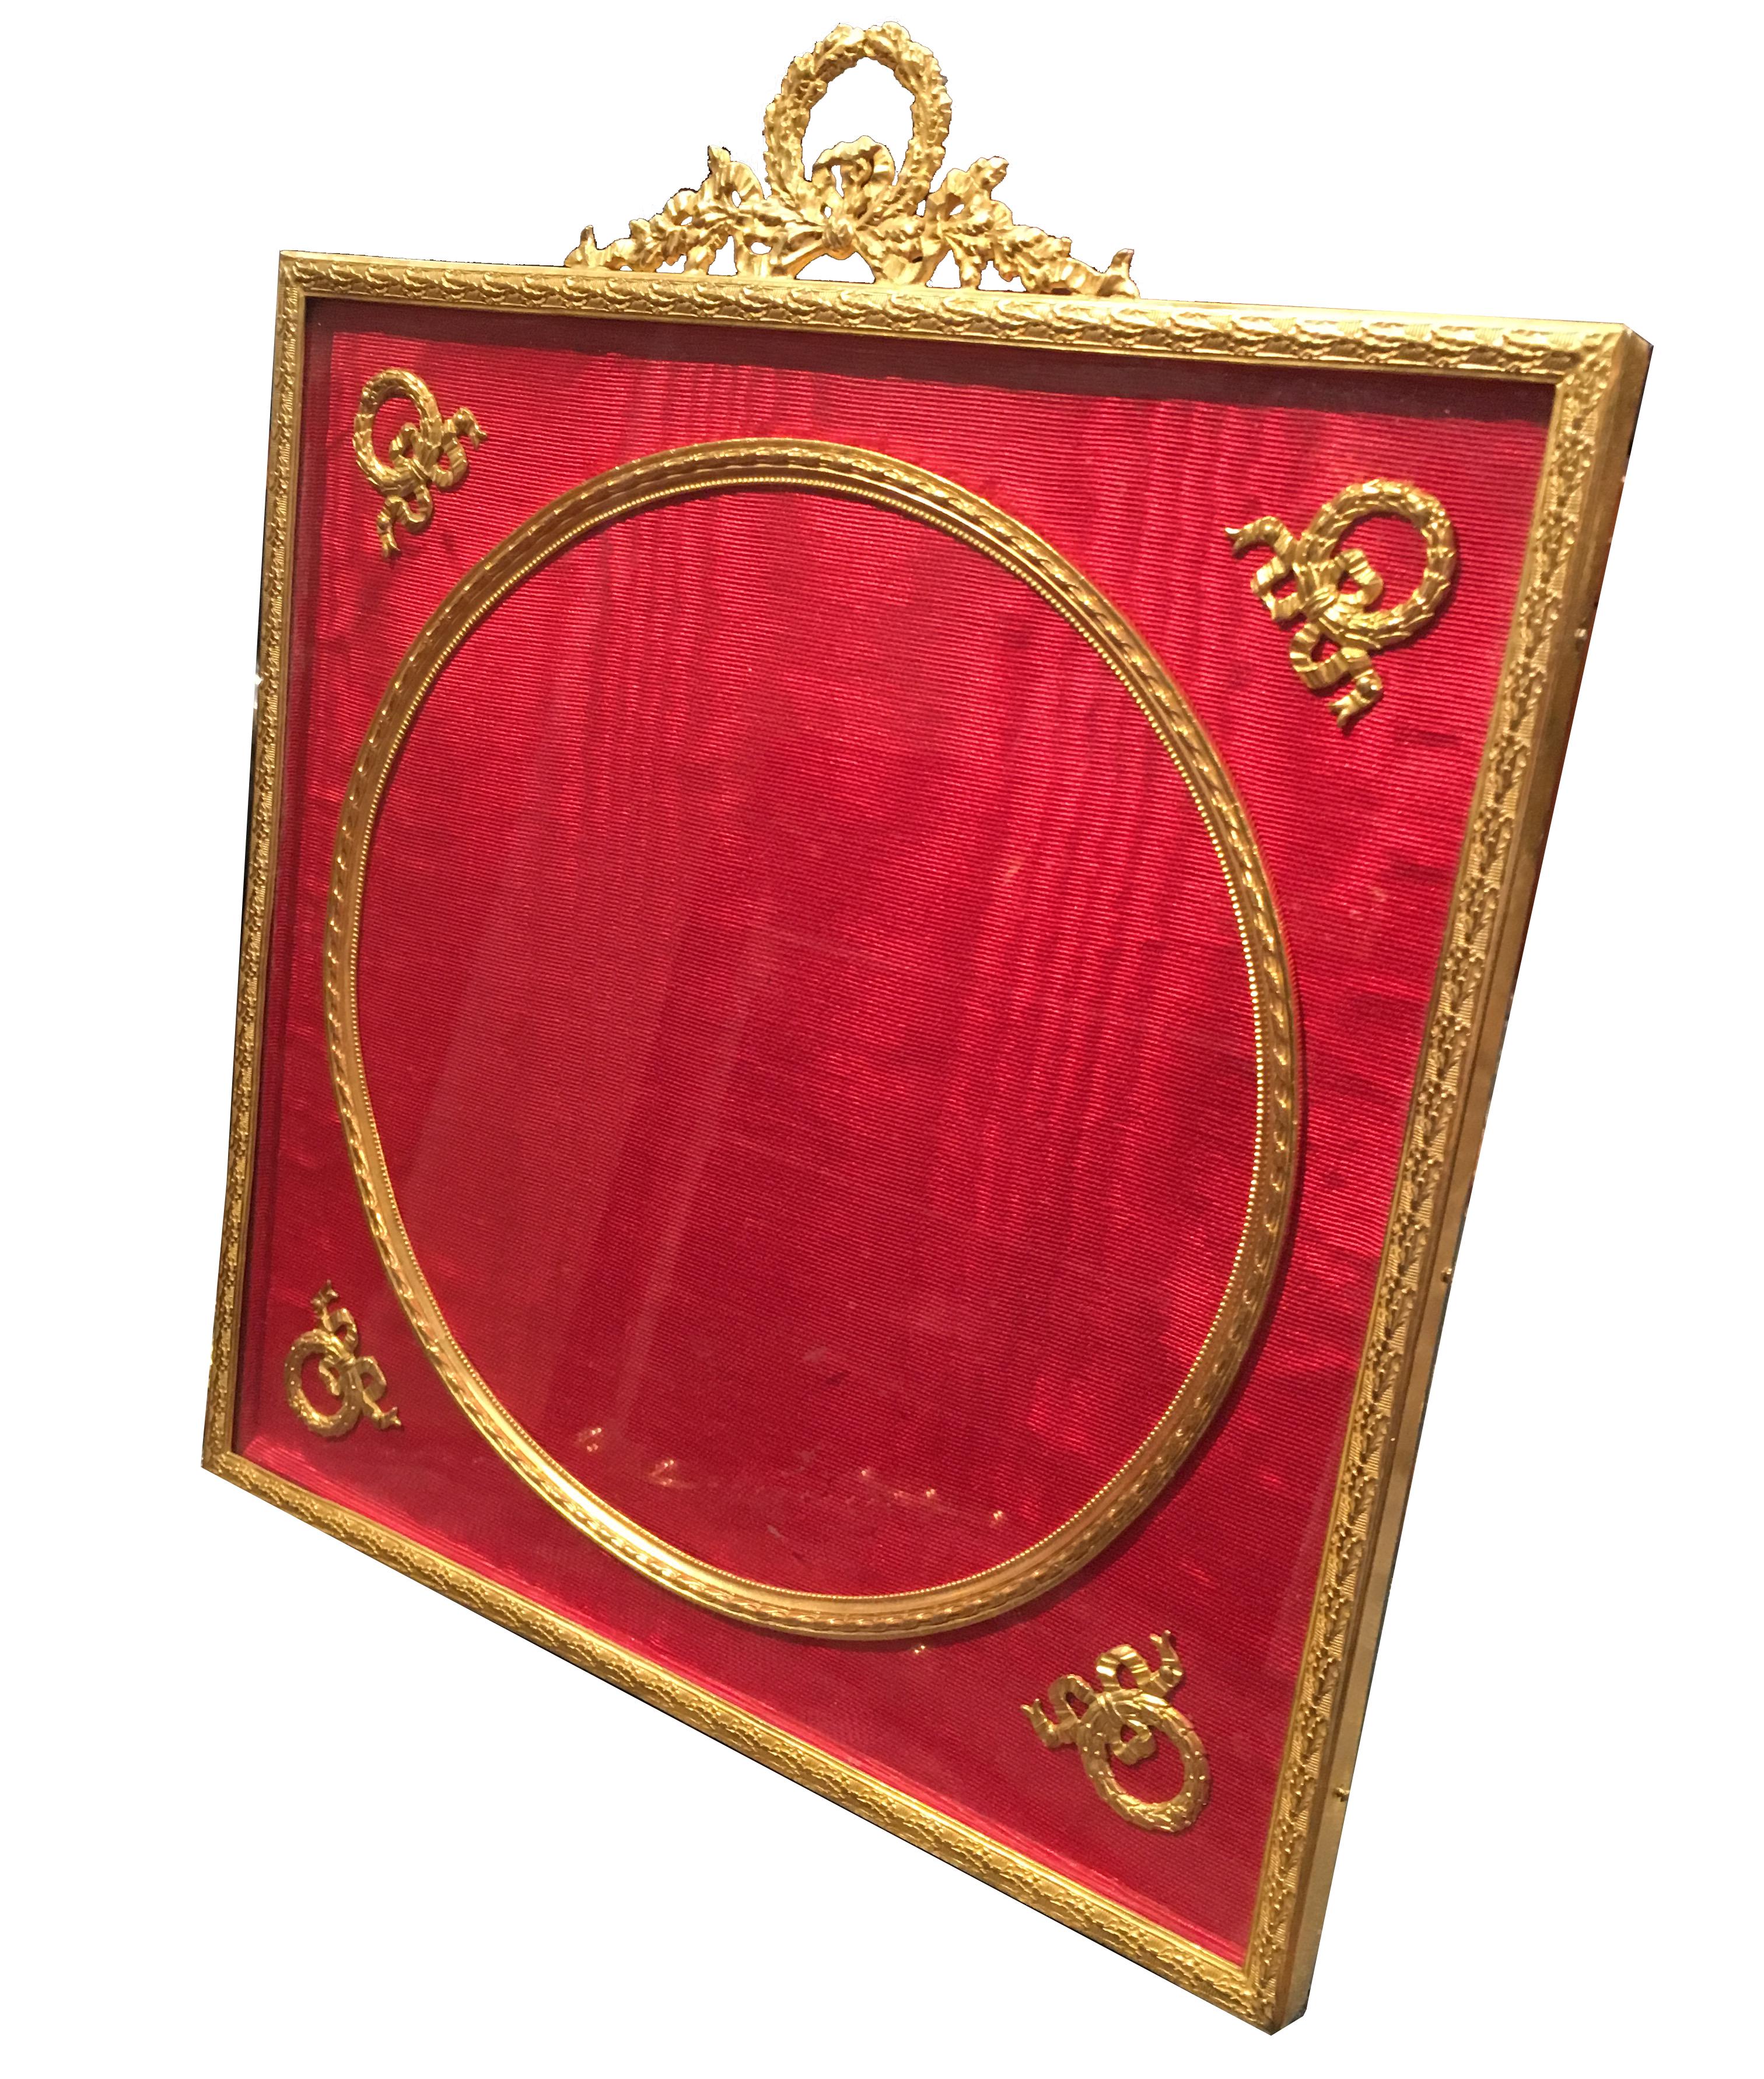 European Large Late Victorian Gilt Bronze Photograph Frame For Sale